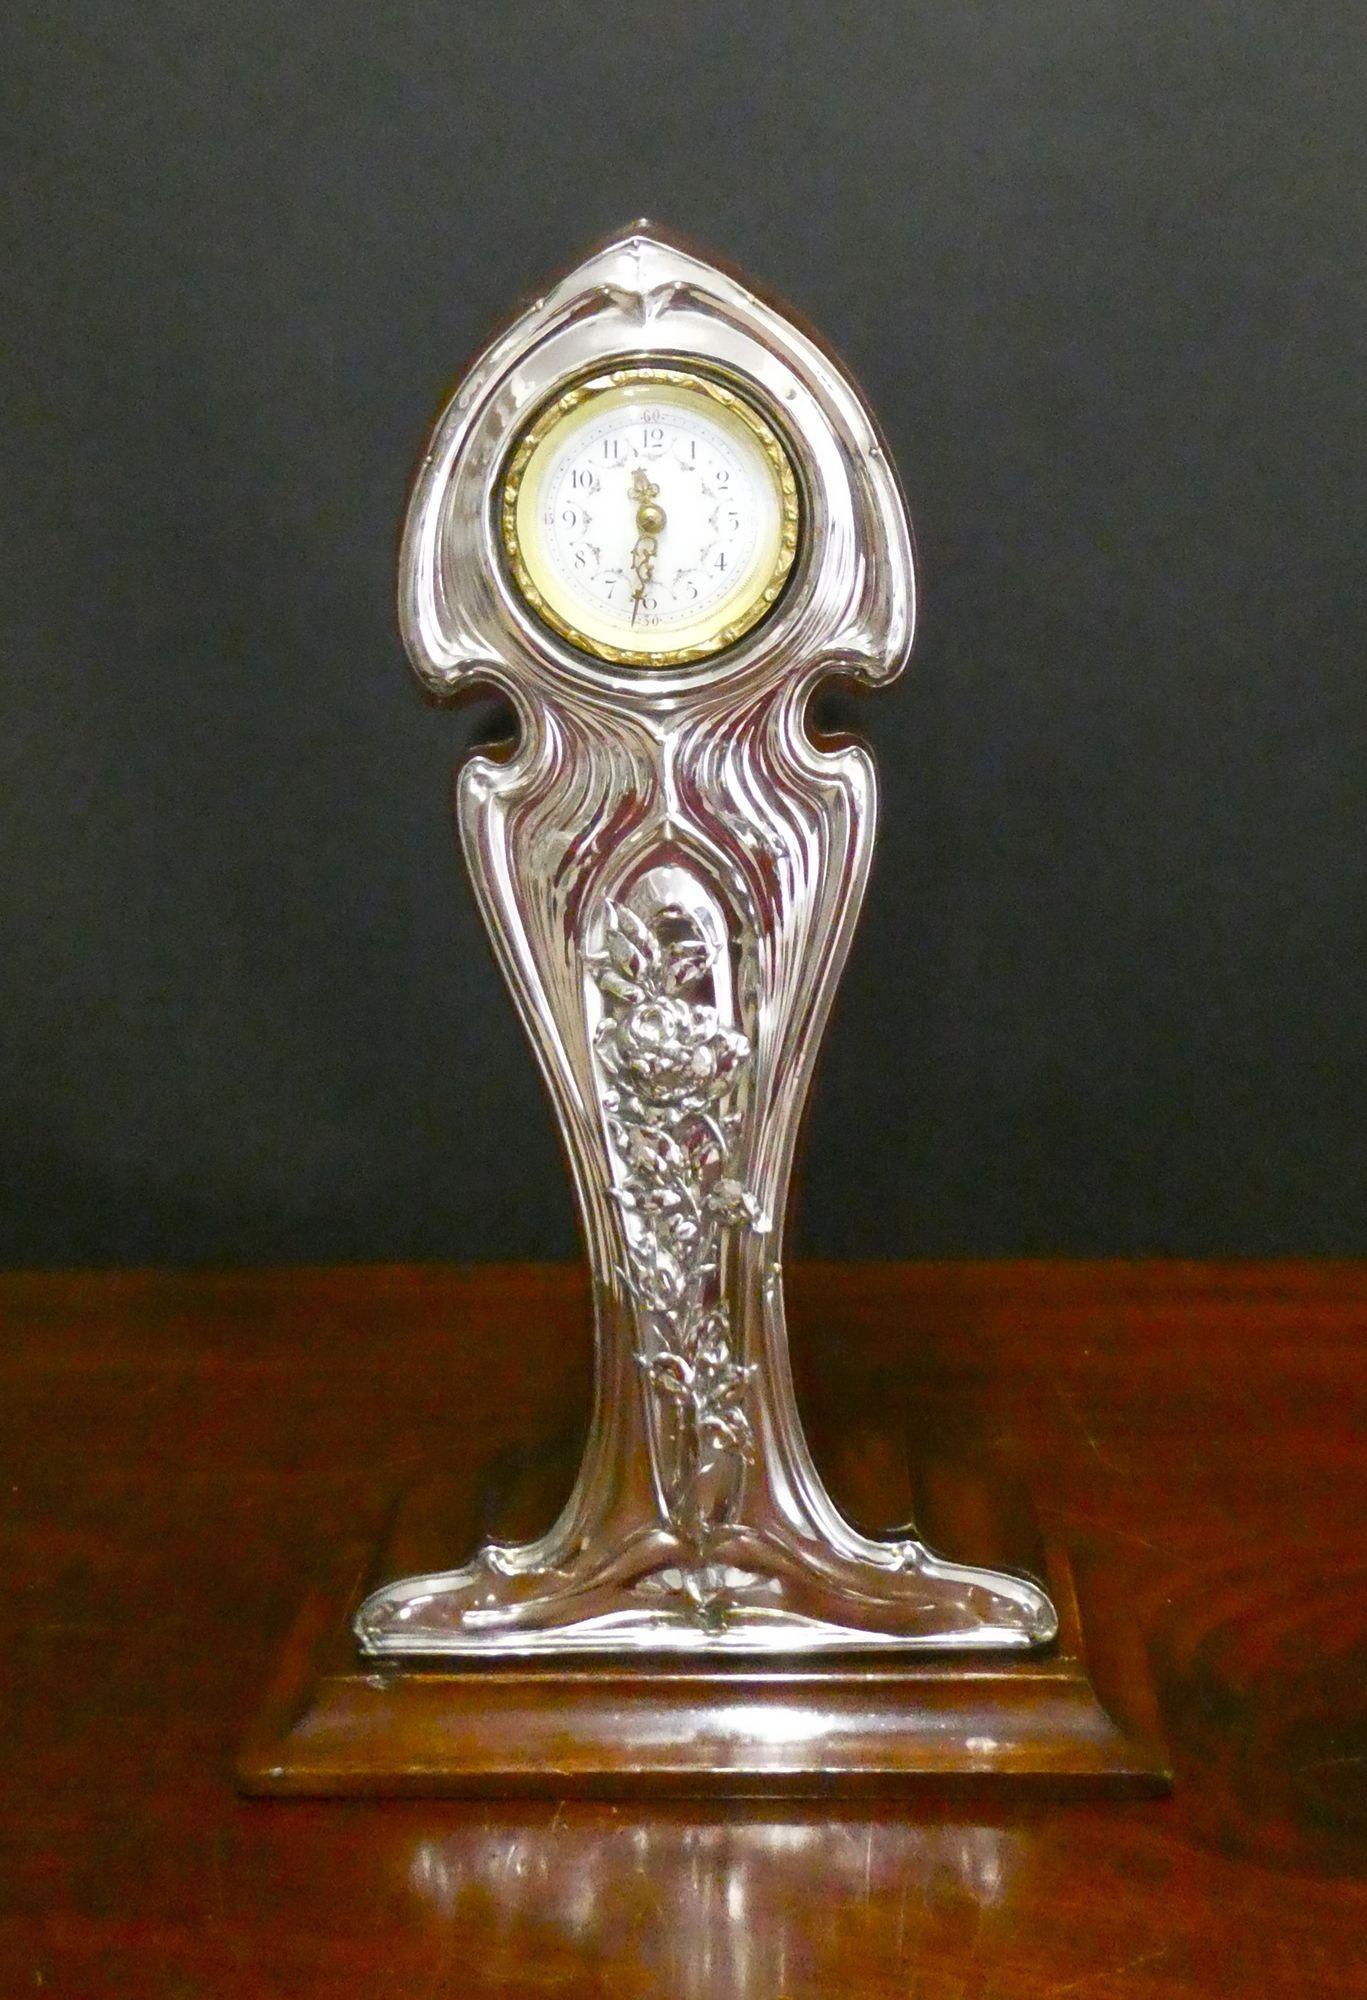 Art Nouveau Mahogany and Silver Mantel Clock
A rare Art Nouveau mantel clock housed in a waisted mahogany case with applied silver front and standing on a stepped base. The silver front decorated with scrolls and floral decoration and bearing the